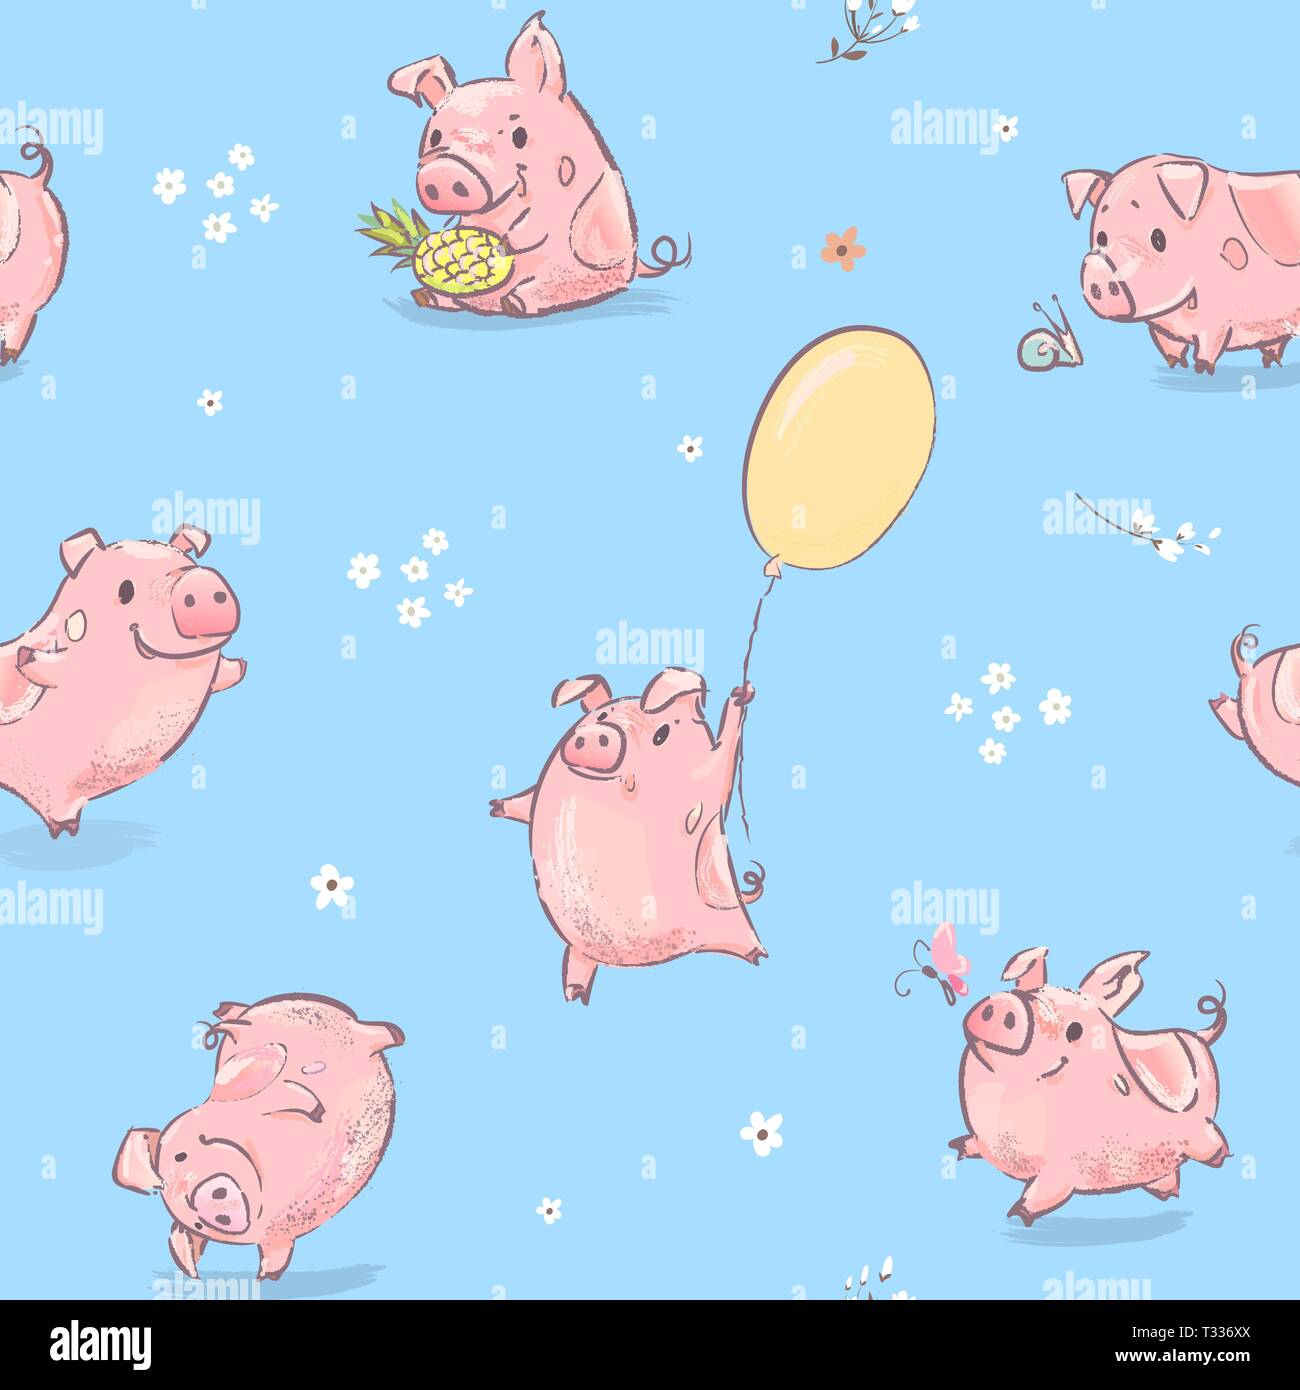 Pink Pig Dance with Balloon Seamless Pattern Stock Vector